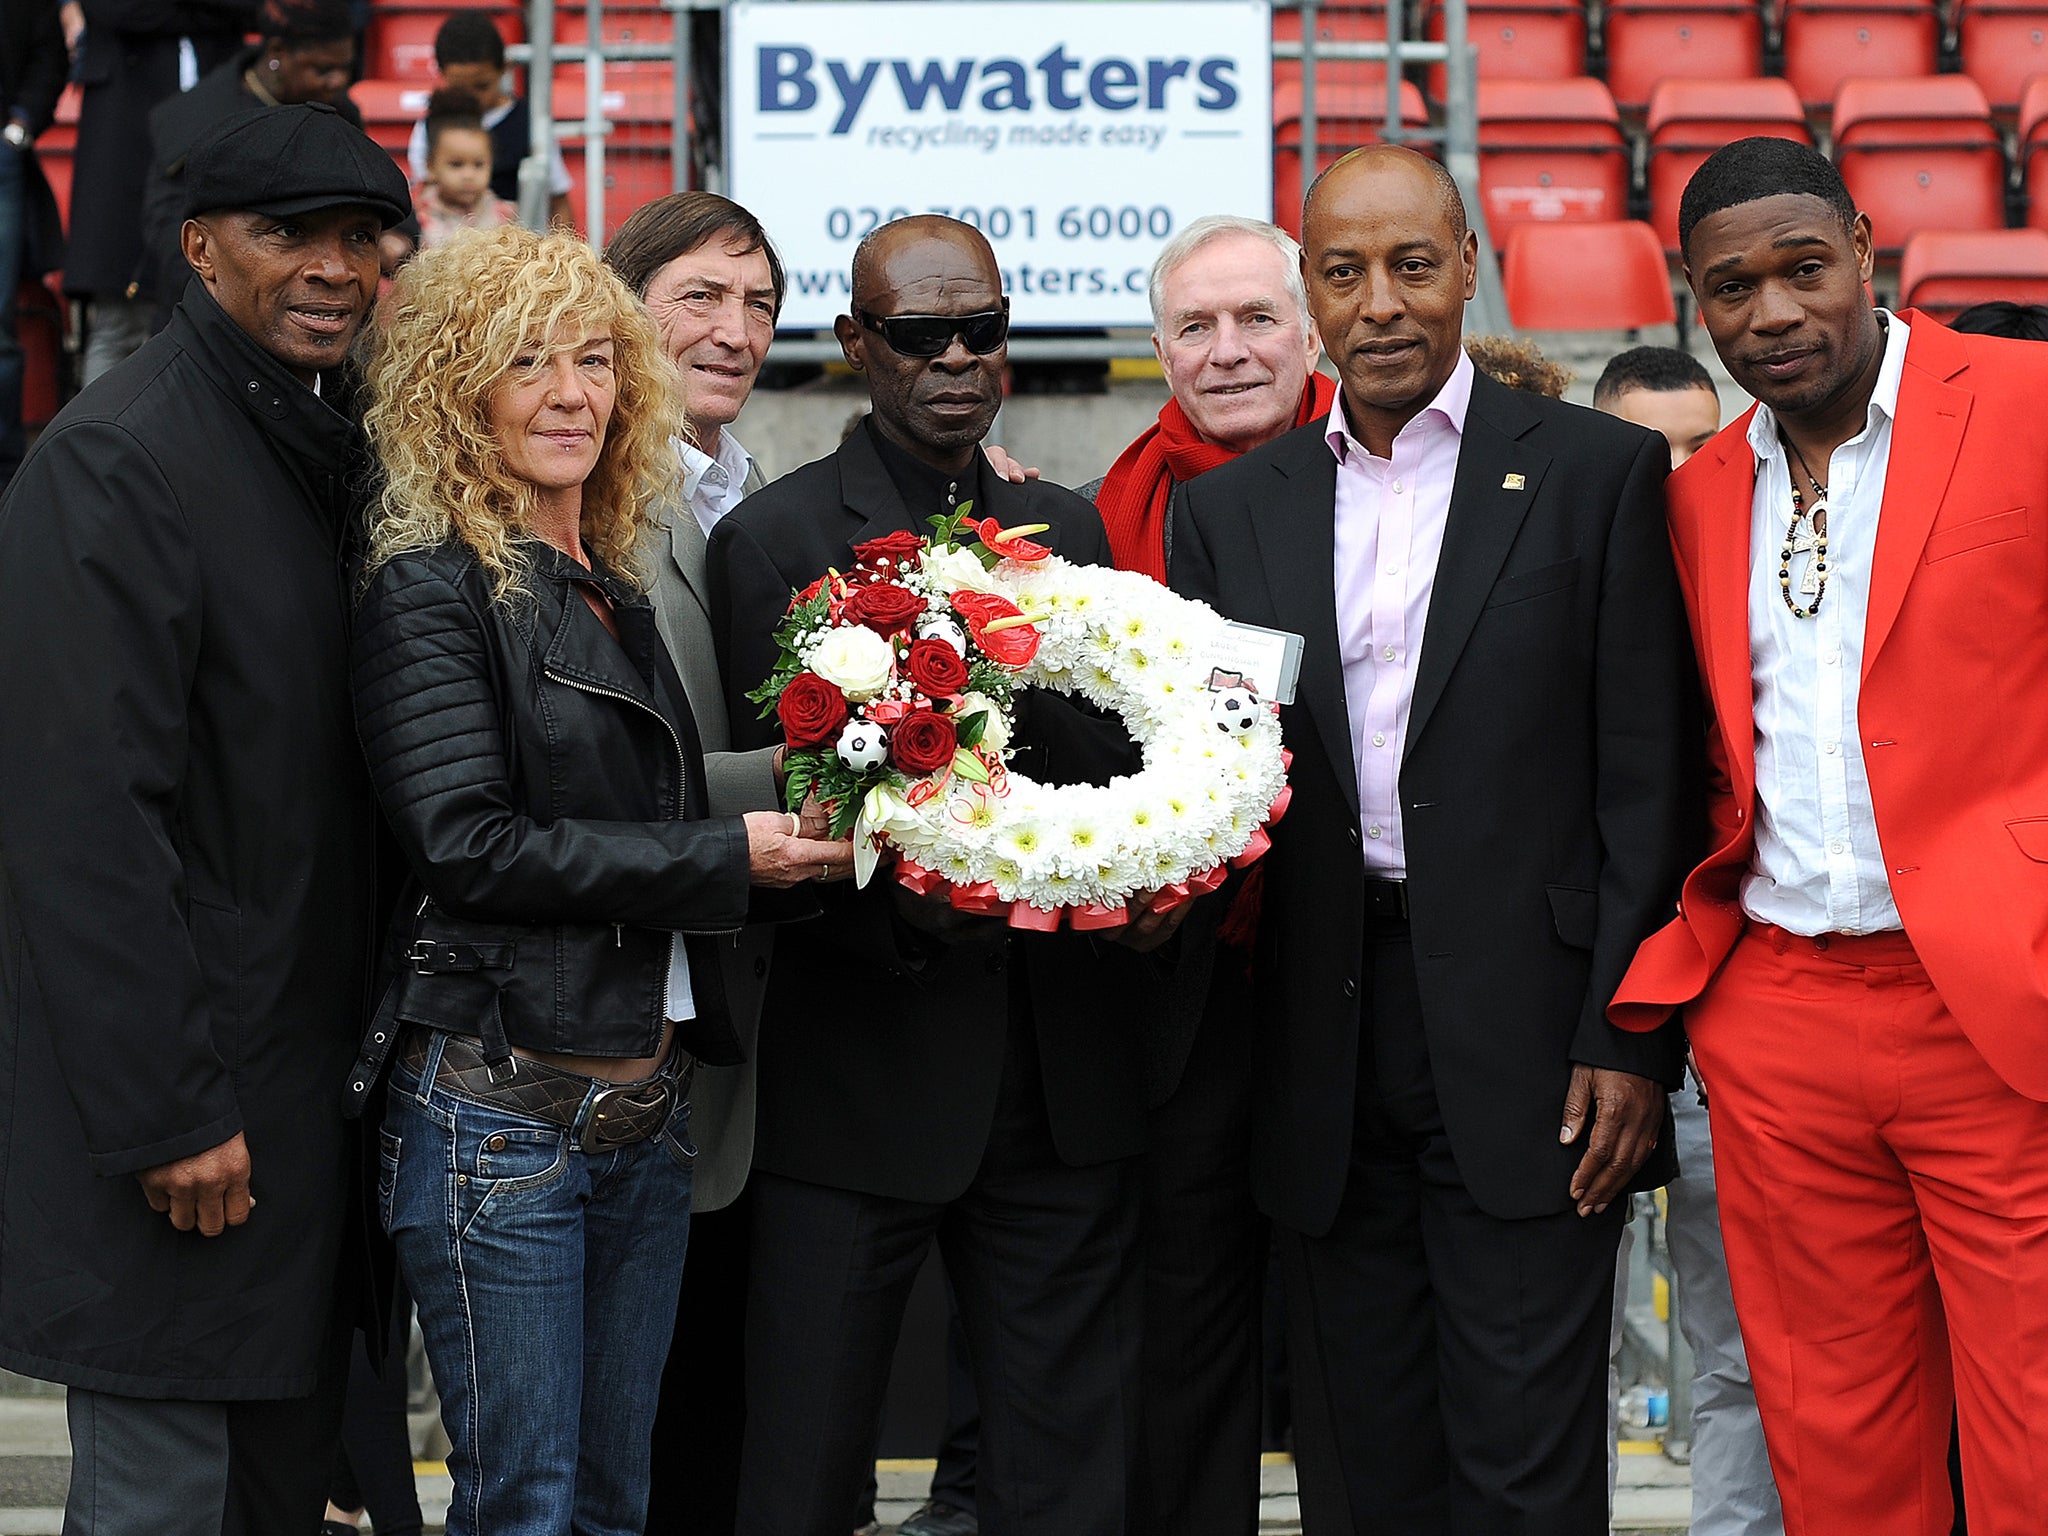 Regis (far left) attends a memorial service for his close friend Cunningham ahead of Leyton Orient vs MK Dons in 2013